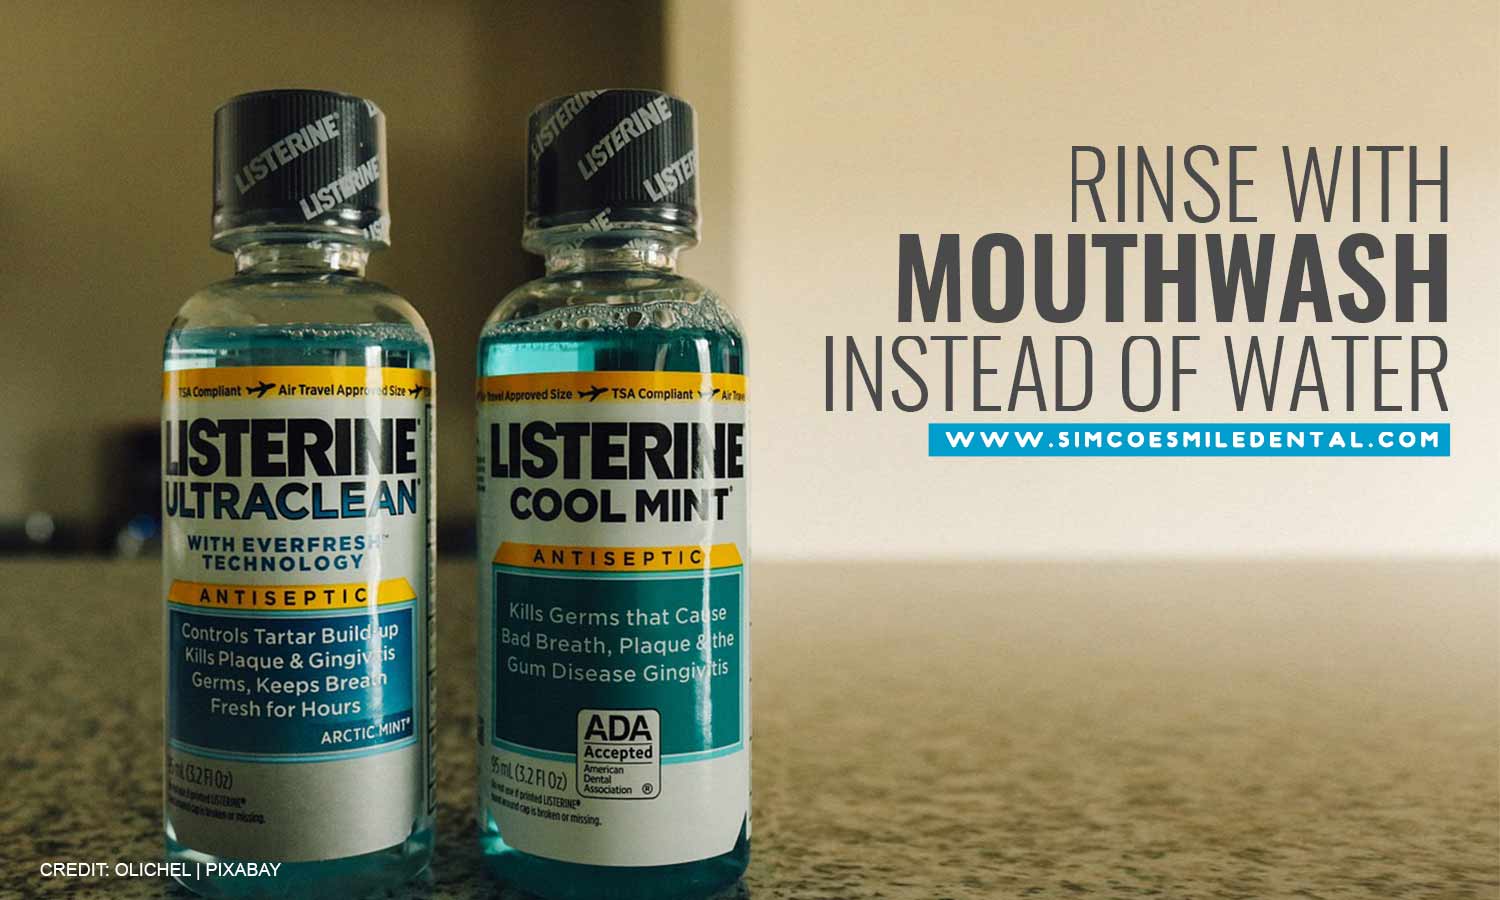 Rinse with mouthwash instead of water